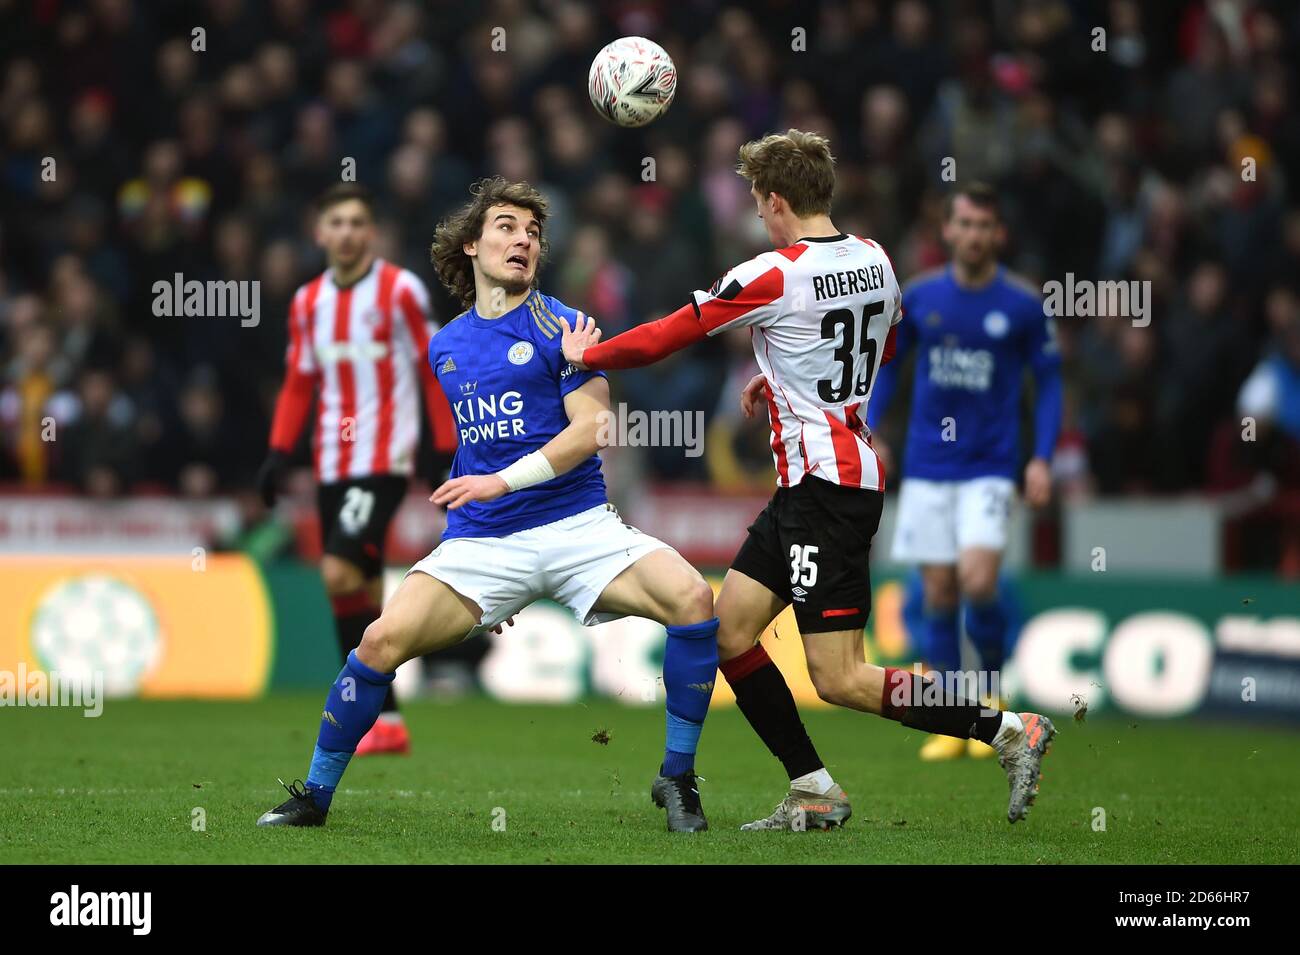 Leicester City's Caglar Soyuncu (left) and Brentford's Mads Roerslev Rasmussen battle for the ball  Stock Photo